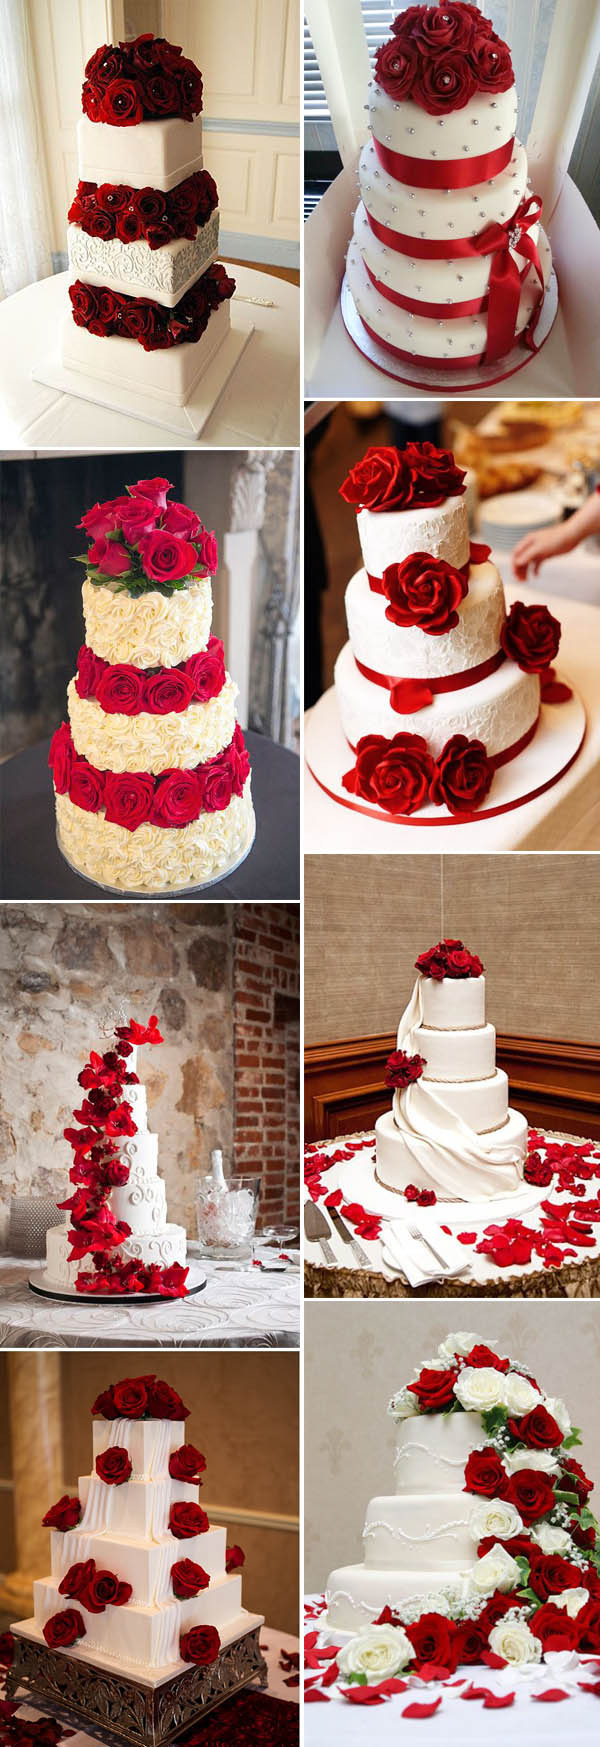 Wedding Decorations Red And White
 40 Inspirational Classic Red and White Wedding Ideas